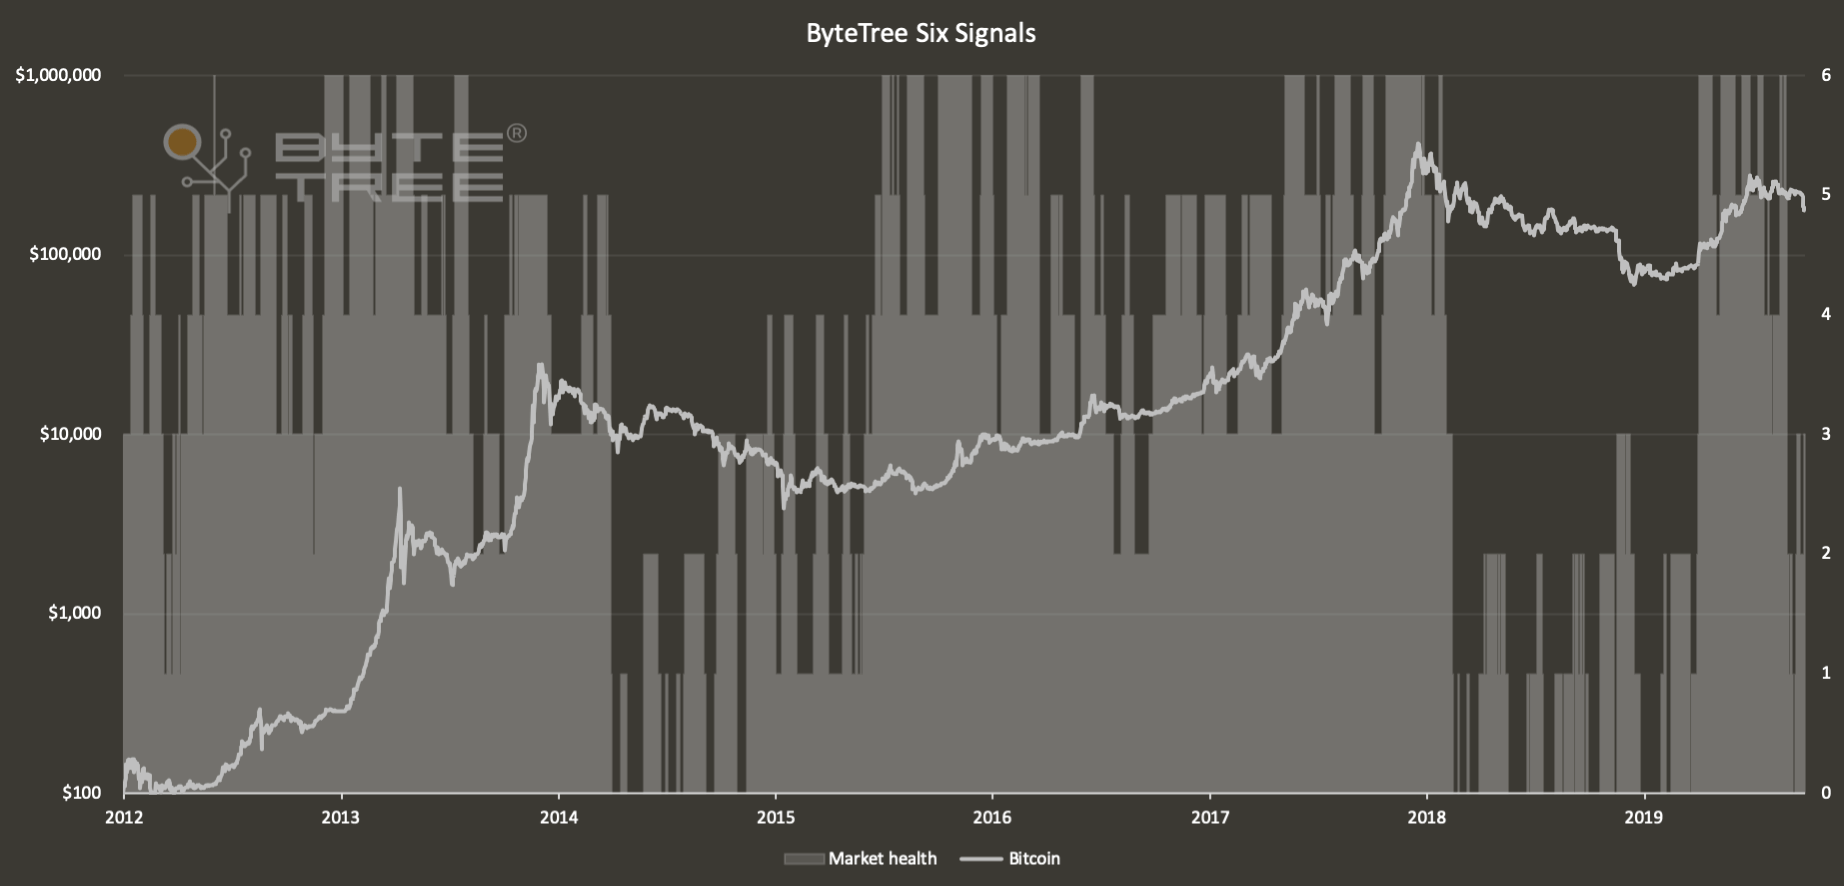 Source ByteTree.com: Bitcoin $ (black) and six strategies bull mode count (grey shaded) since 2012.